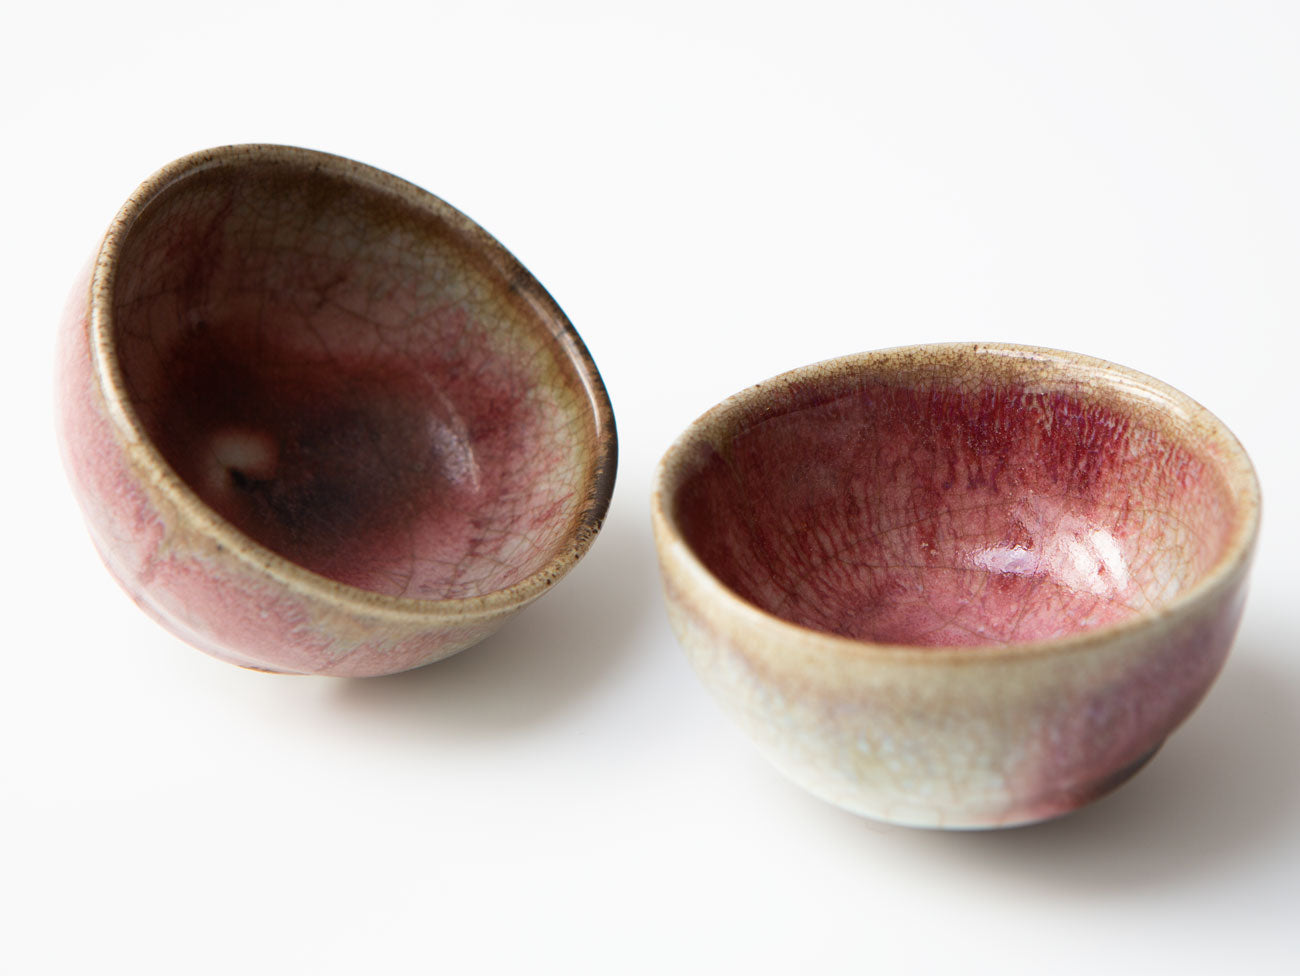 A Pair of Rose Cups, Three. wood-fired. Liao Guo Hua.